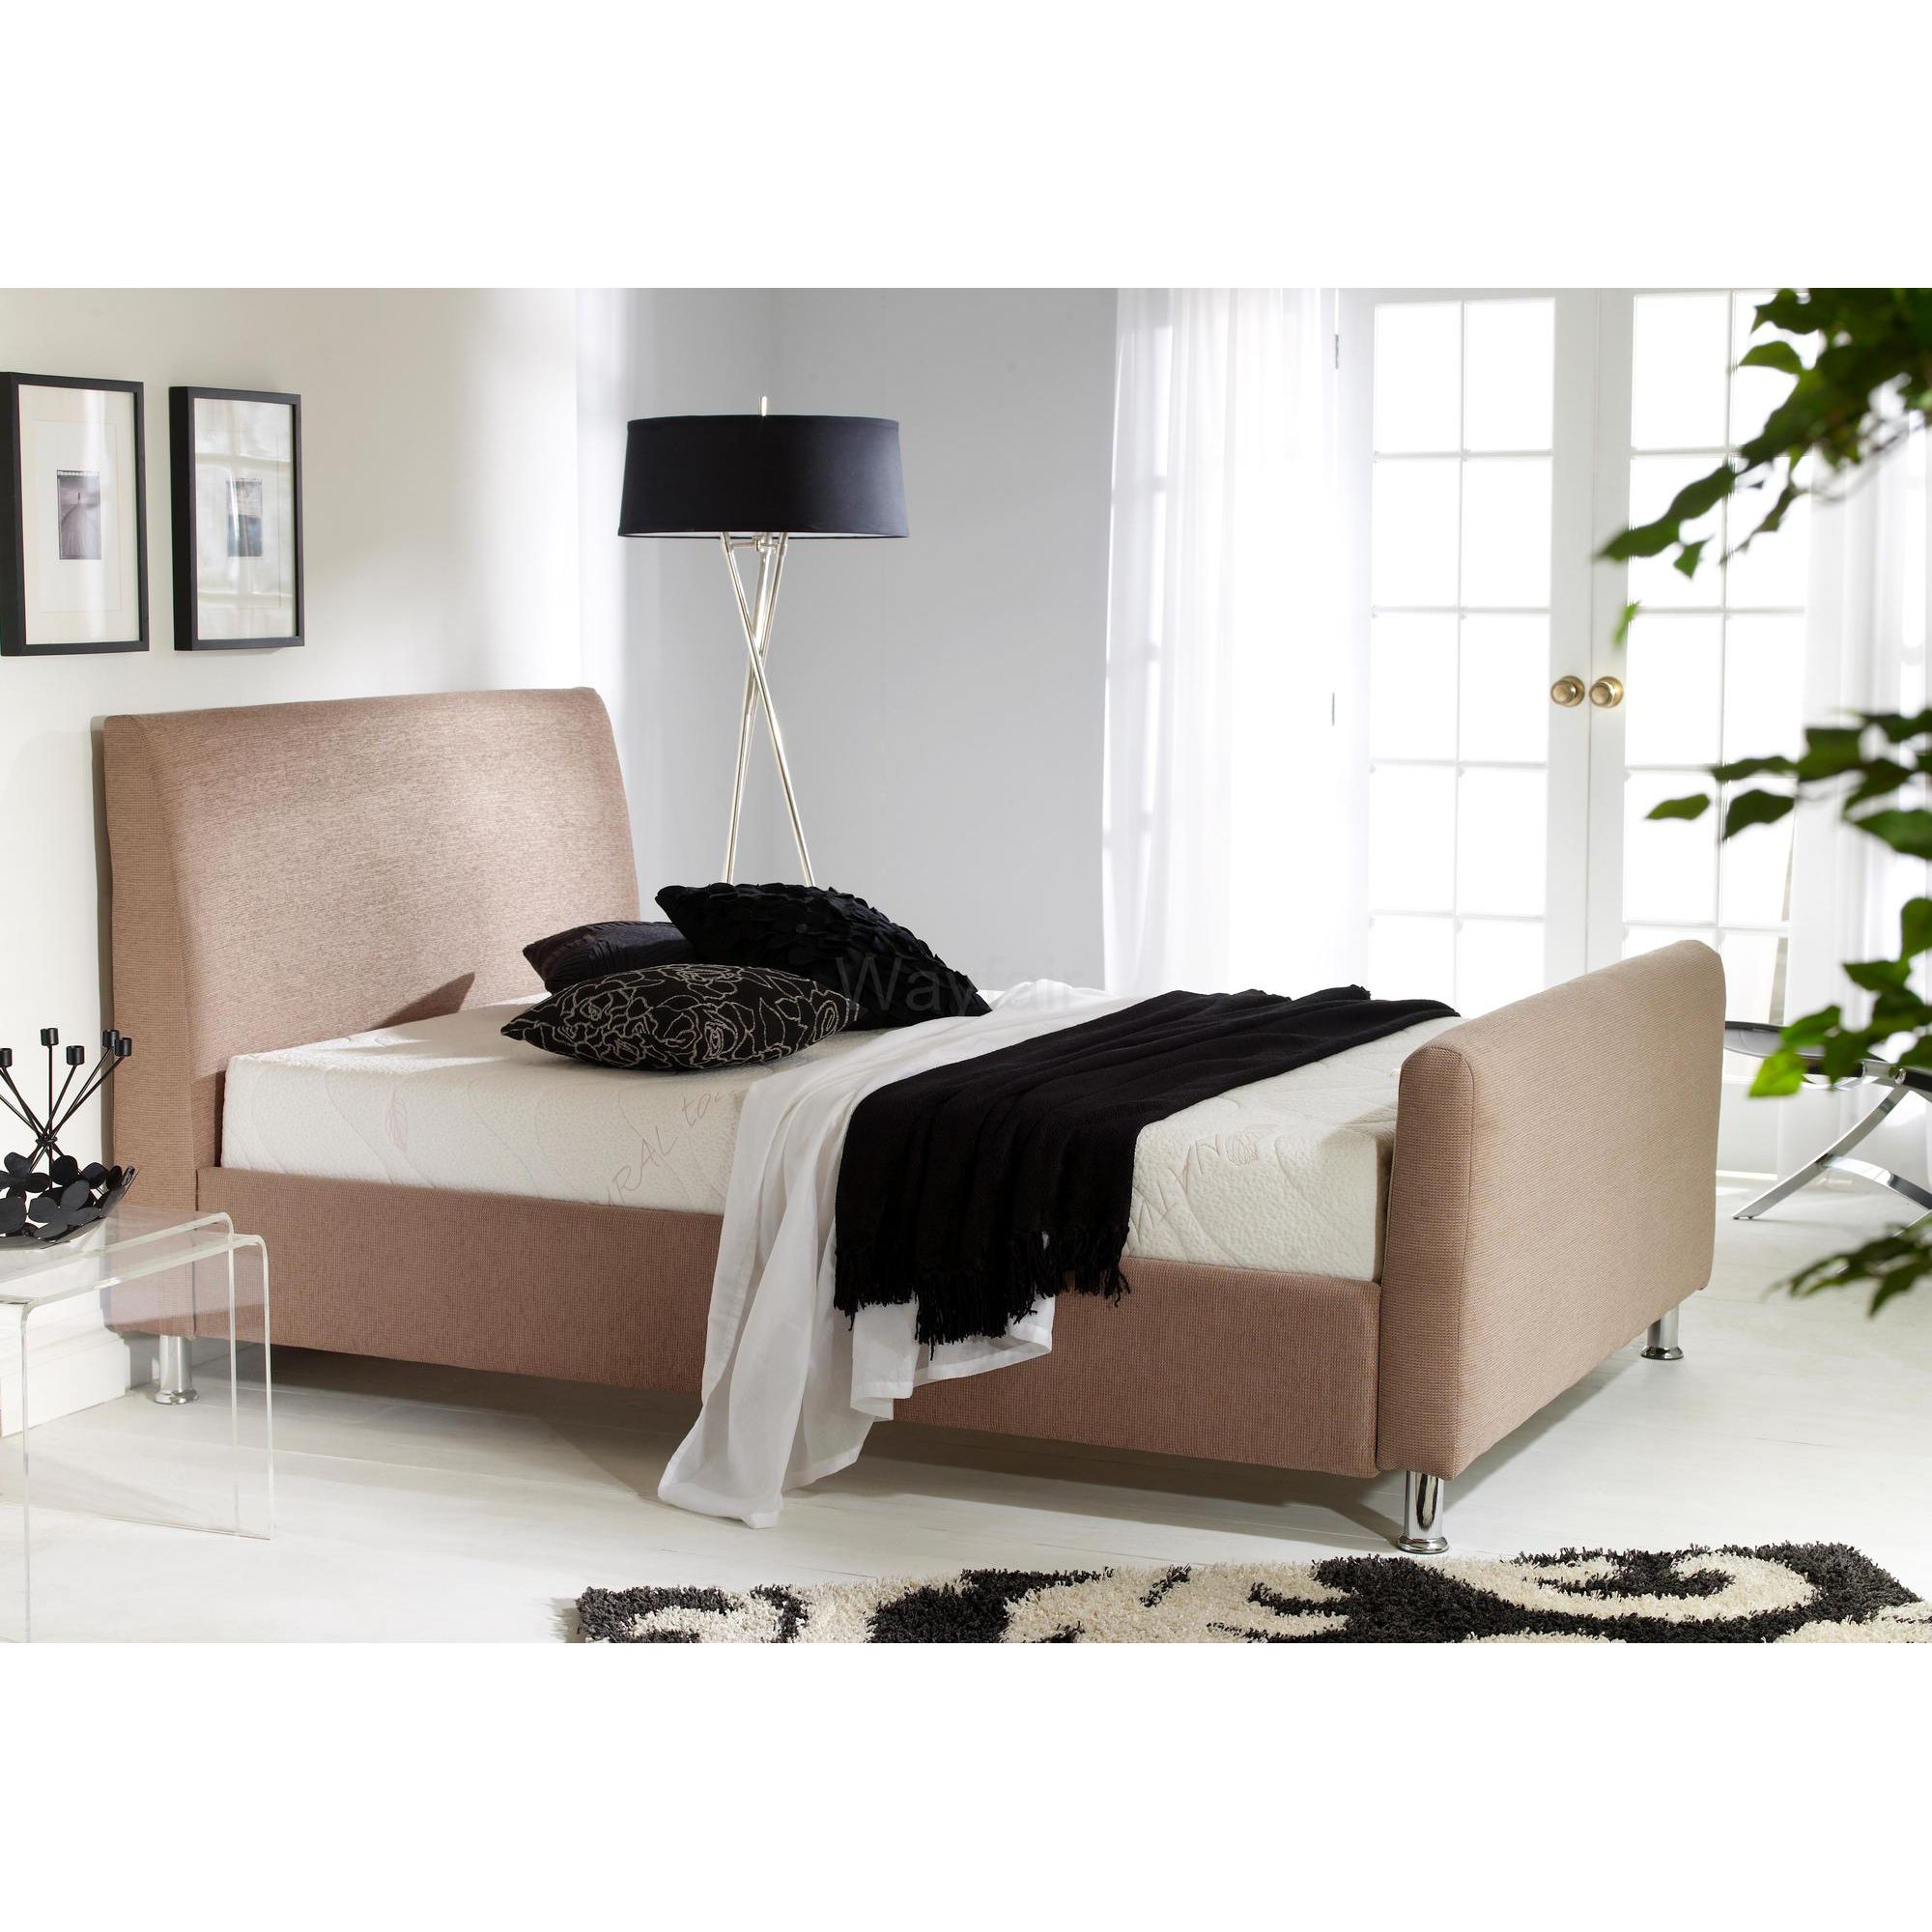 MA Living Kamli Bed - Double - faux leather Brown at Tesco Direct